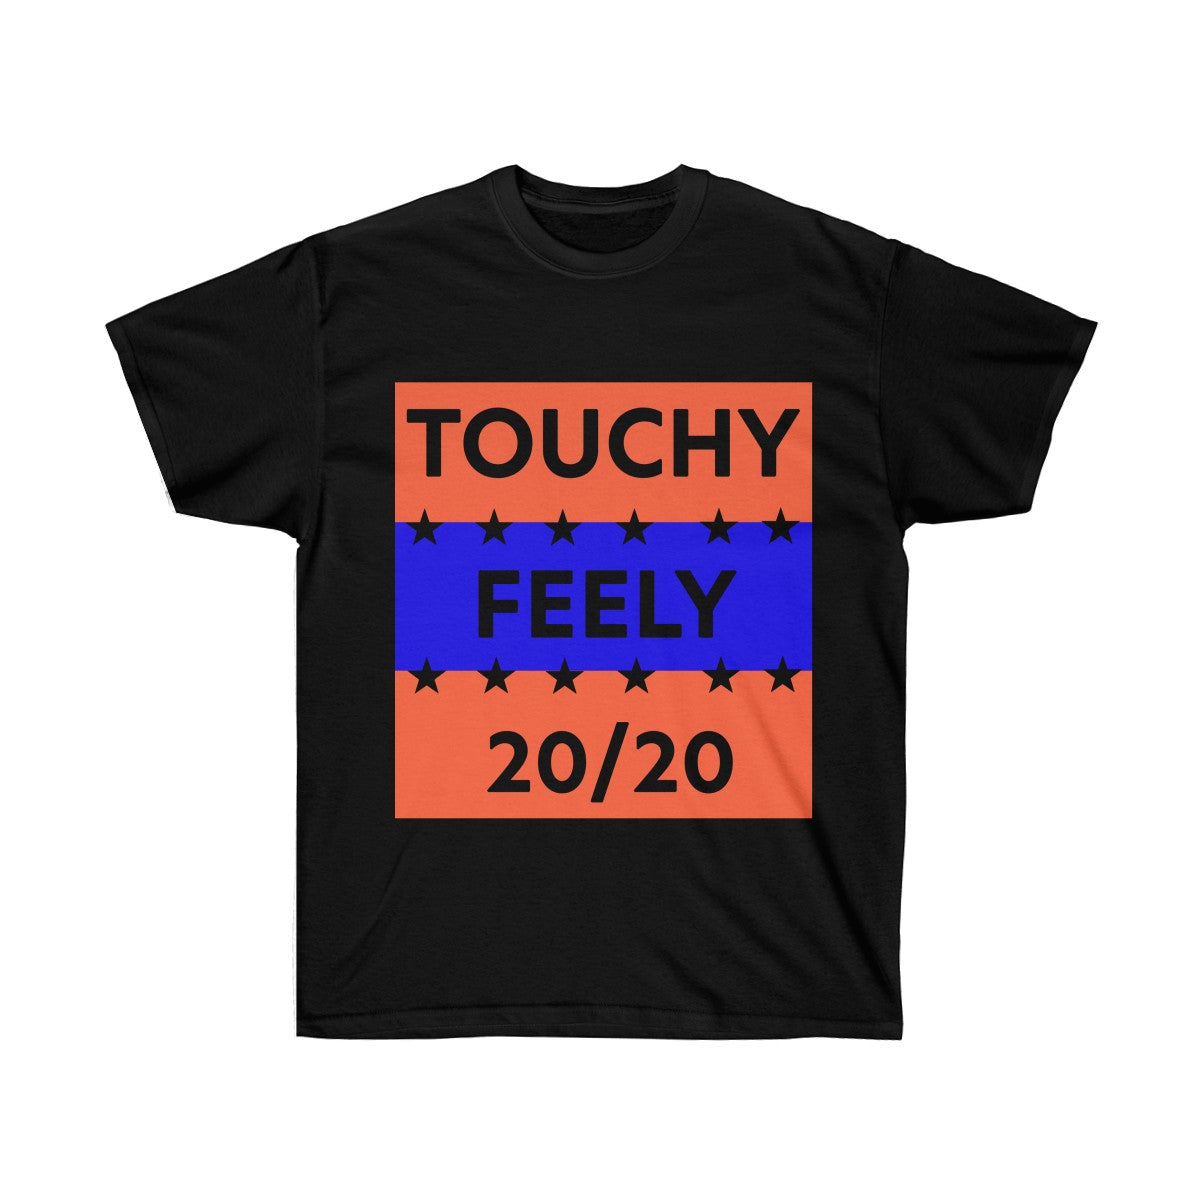 Touchy Feely 20/20 Funny Election Campaign Tee Shirt